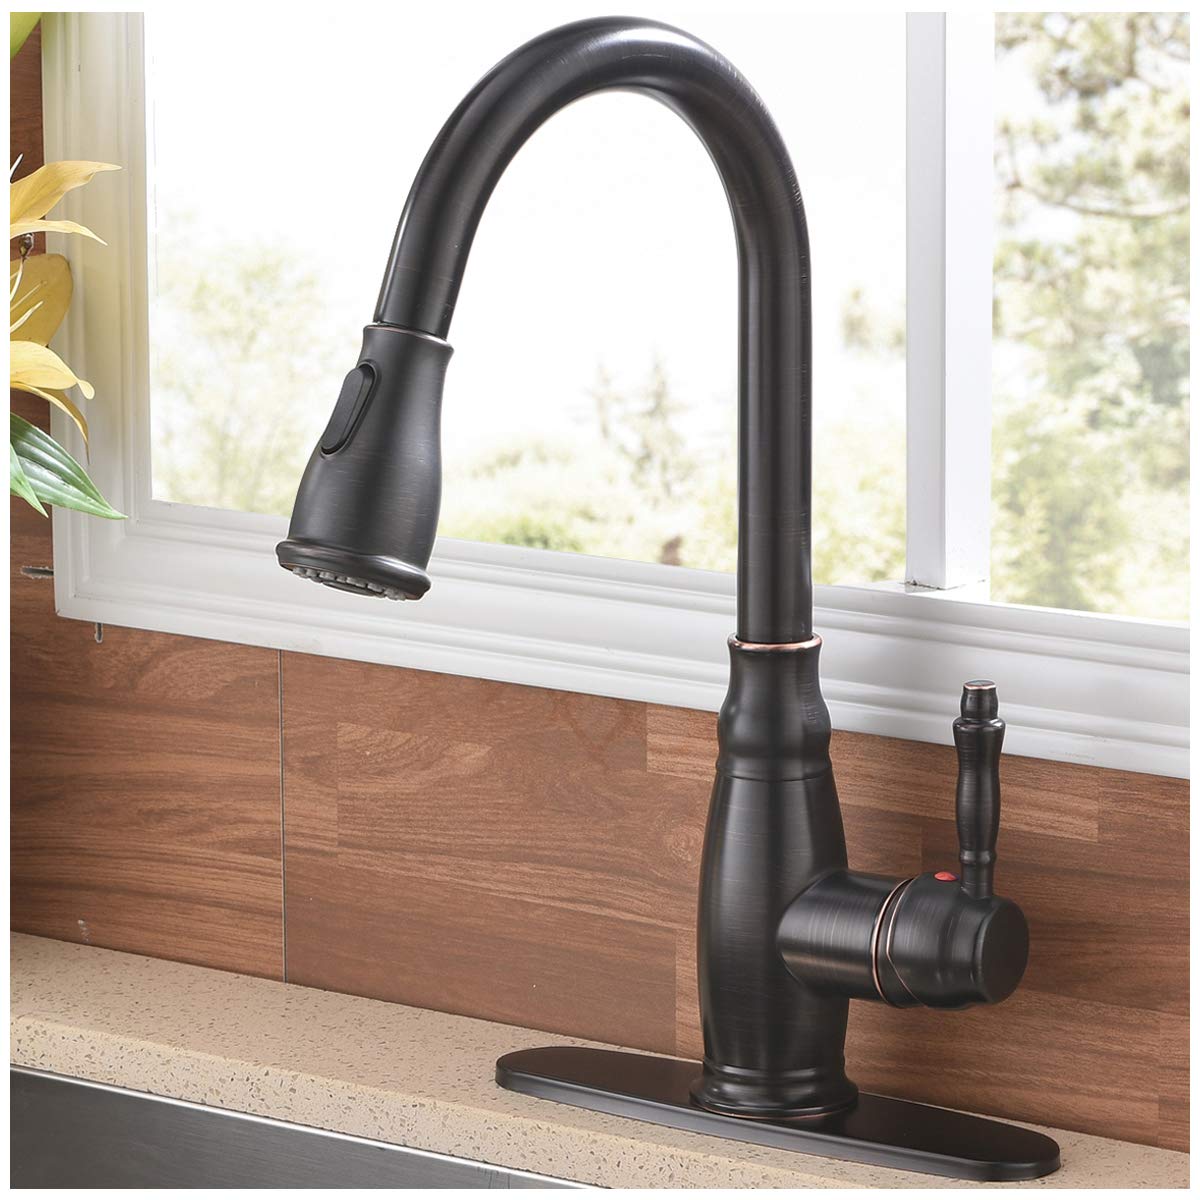 Book Cover SHACO Antique Single Handle Pull Down Sprayer Oil Rubbed Bronze Kitchen Faucet, Farmhouse Kitchen Faucet Bronze with Deck Plate, Kitchen Faucets for Sink 3 Hole or Single Hole